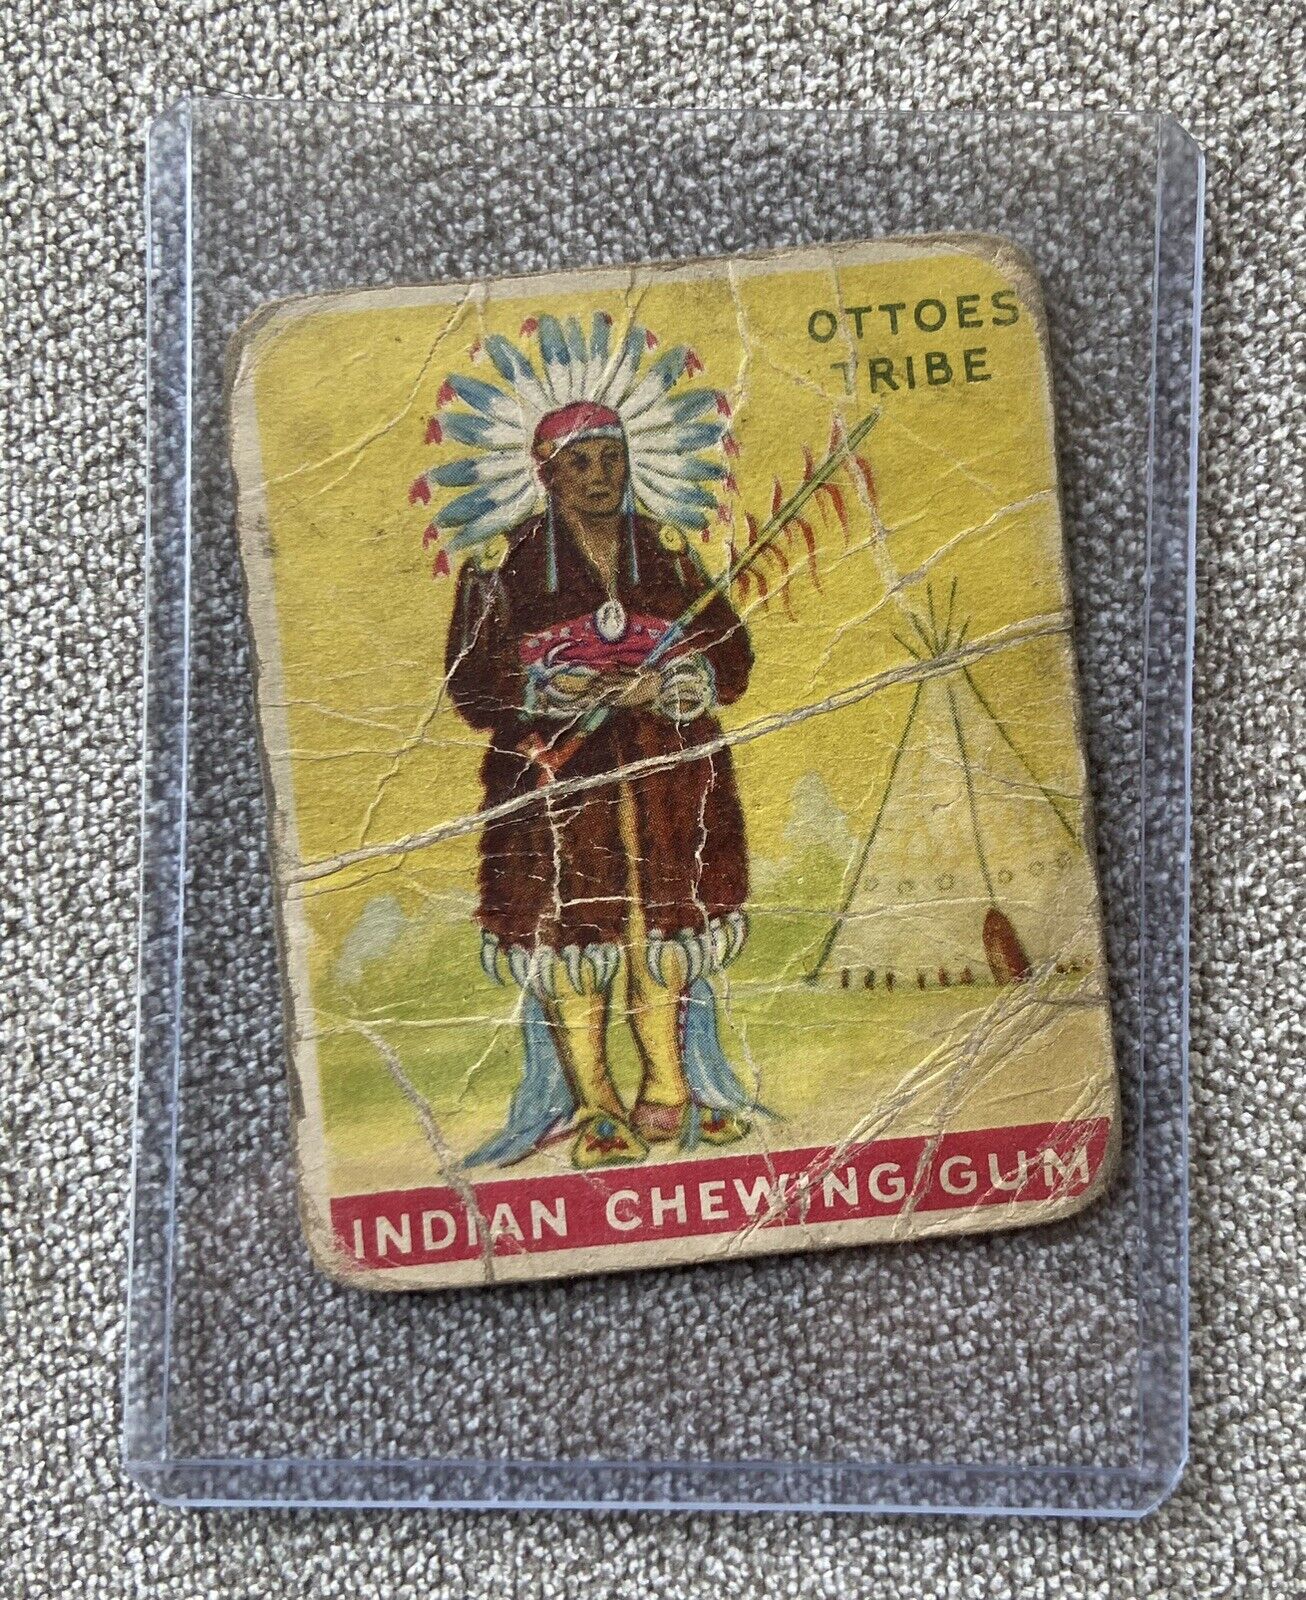 1931 Goudey Indian Gum Company Chief of the Ottoes Tribe #14